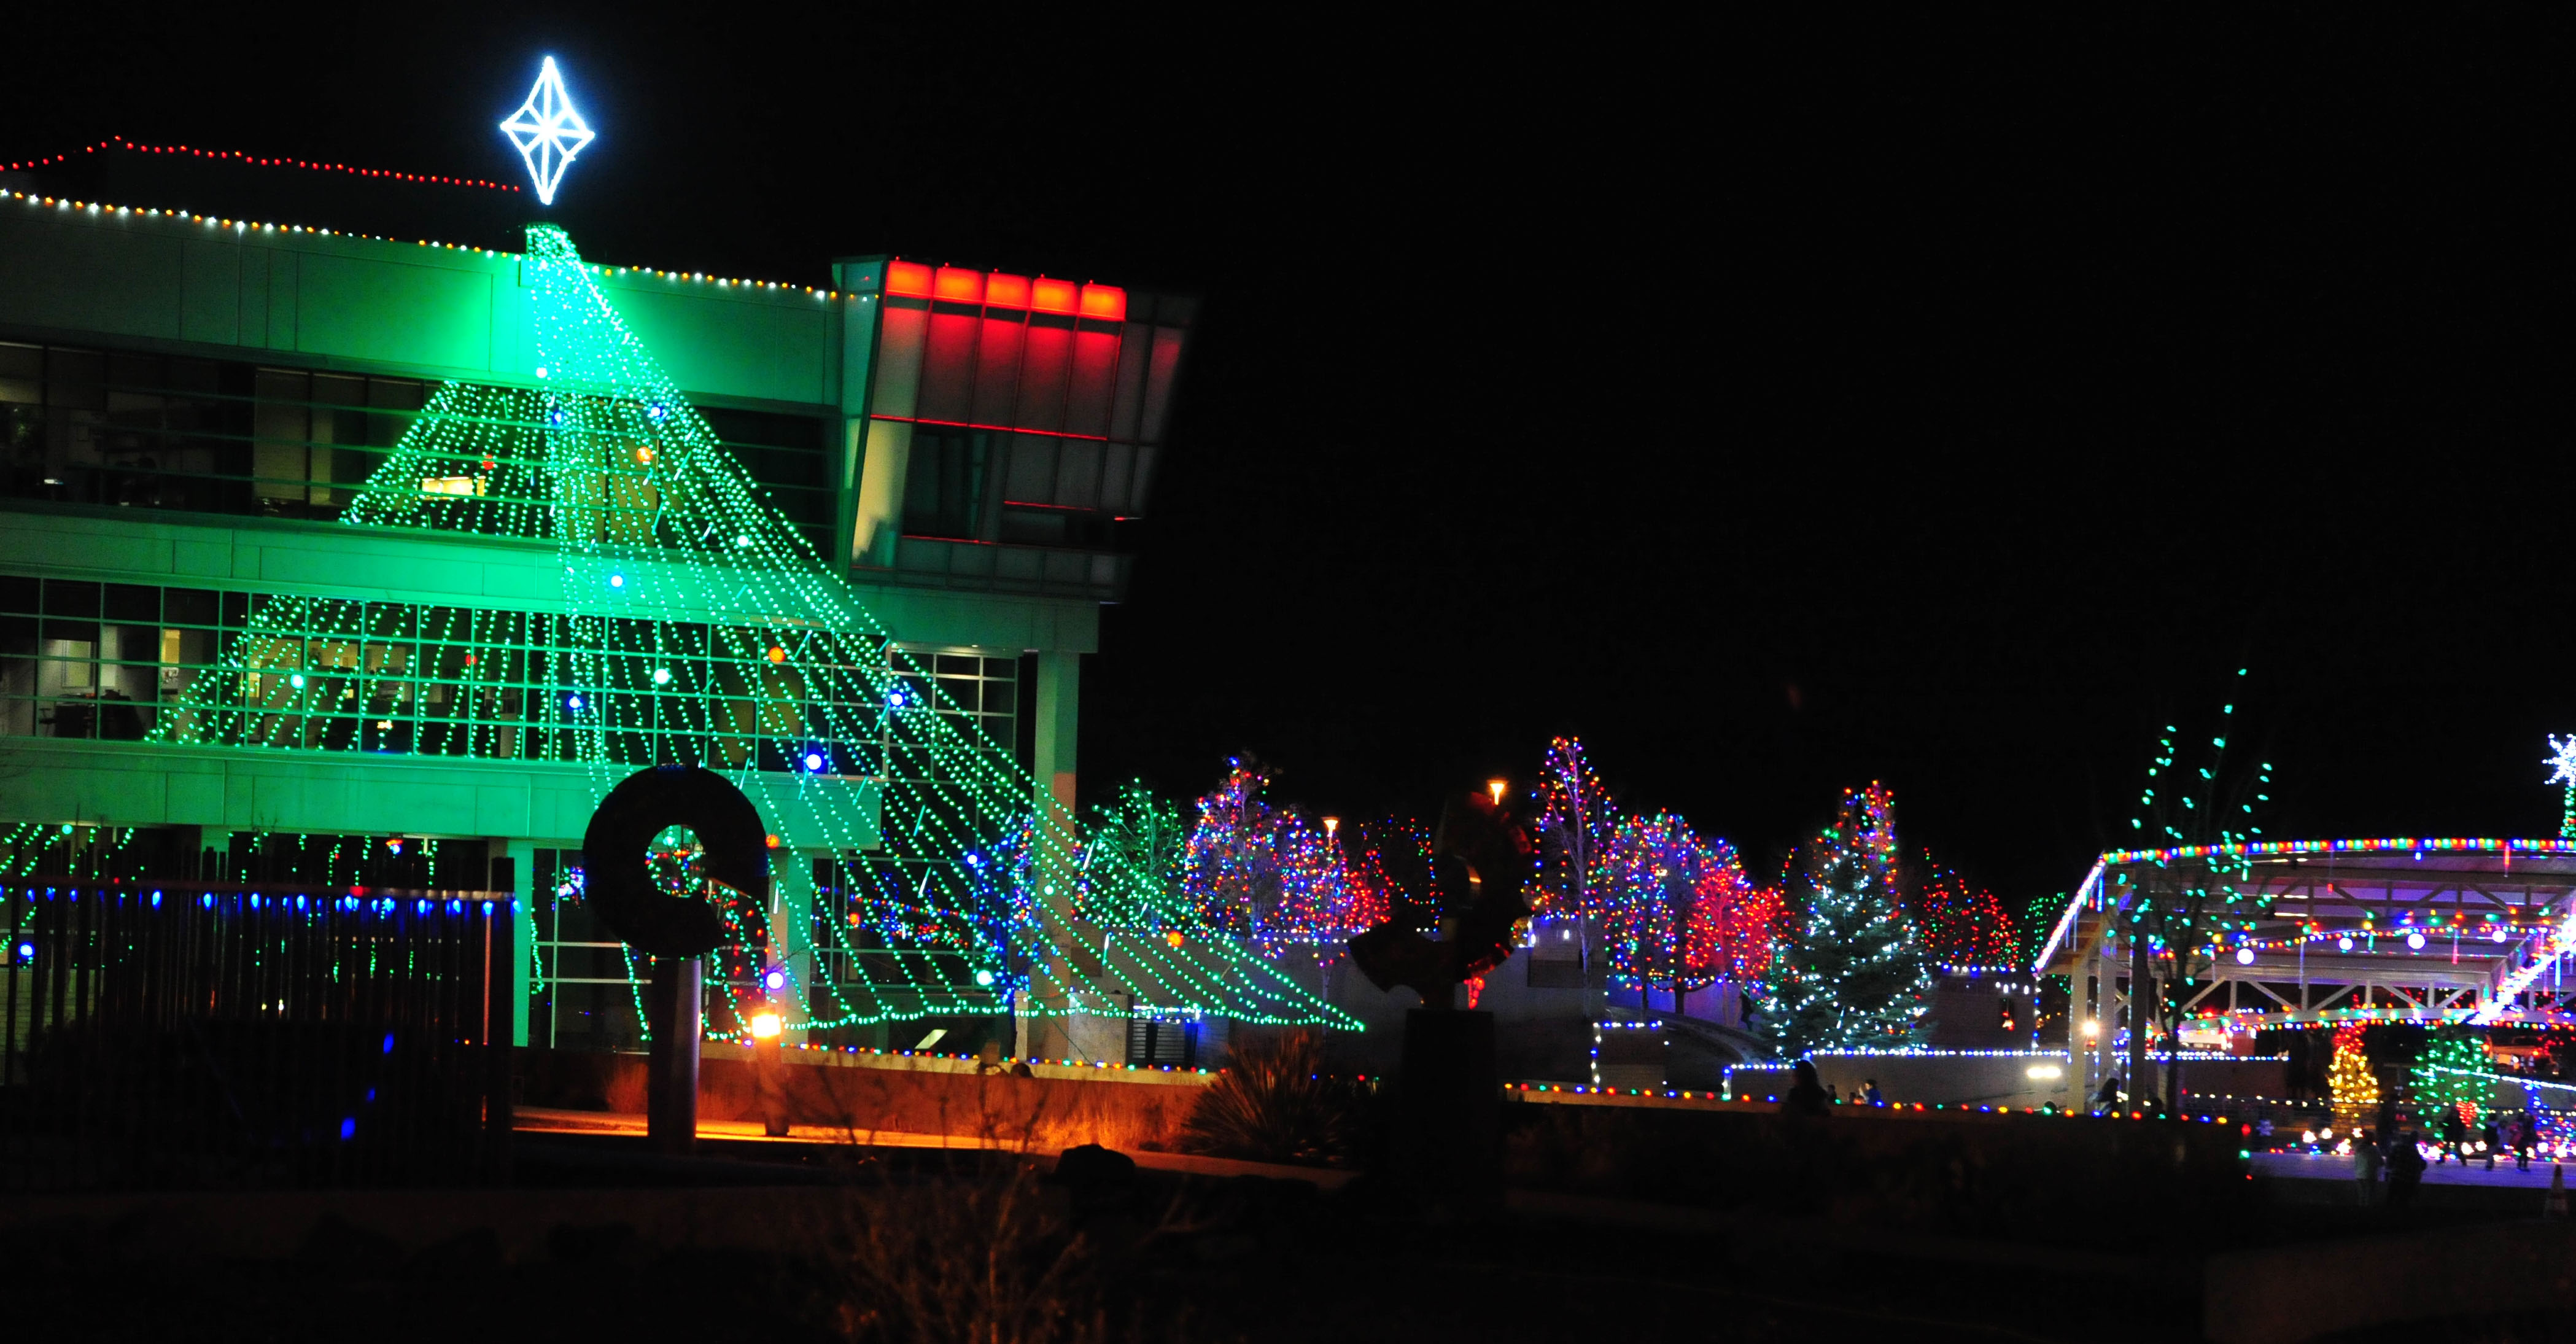 Prescott Valley Holiday Festival of Lights & Parade Photo Gallery The